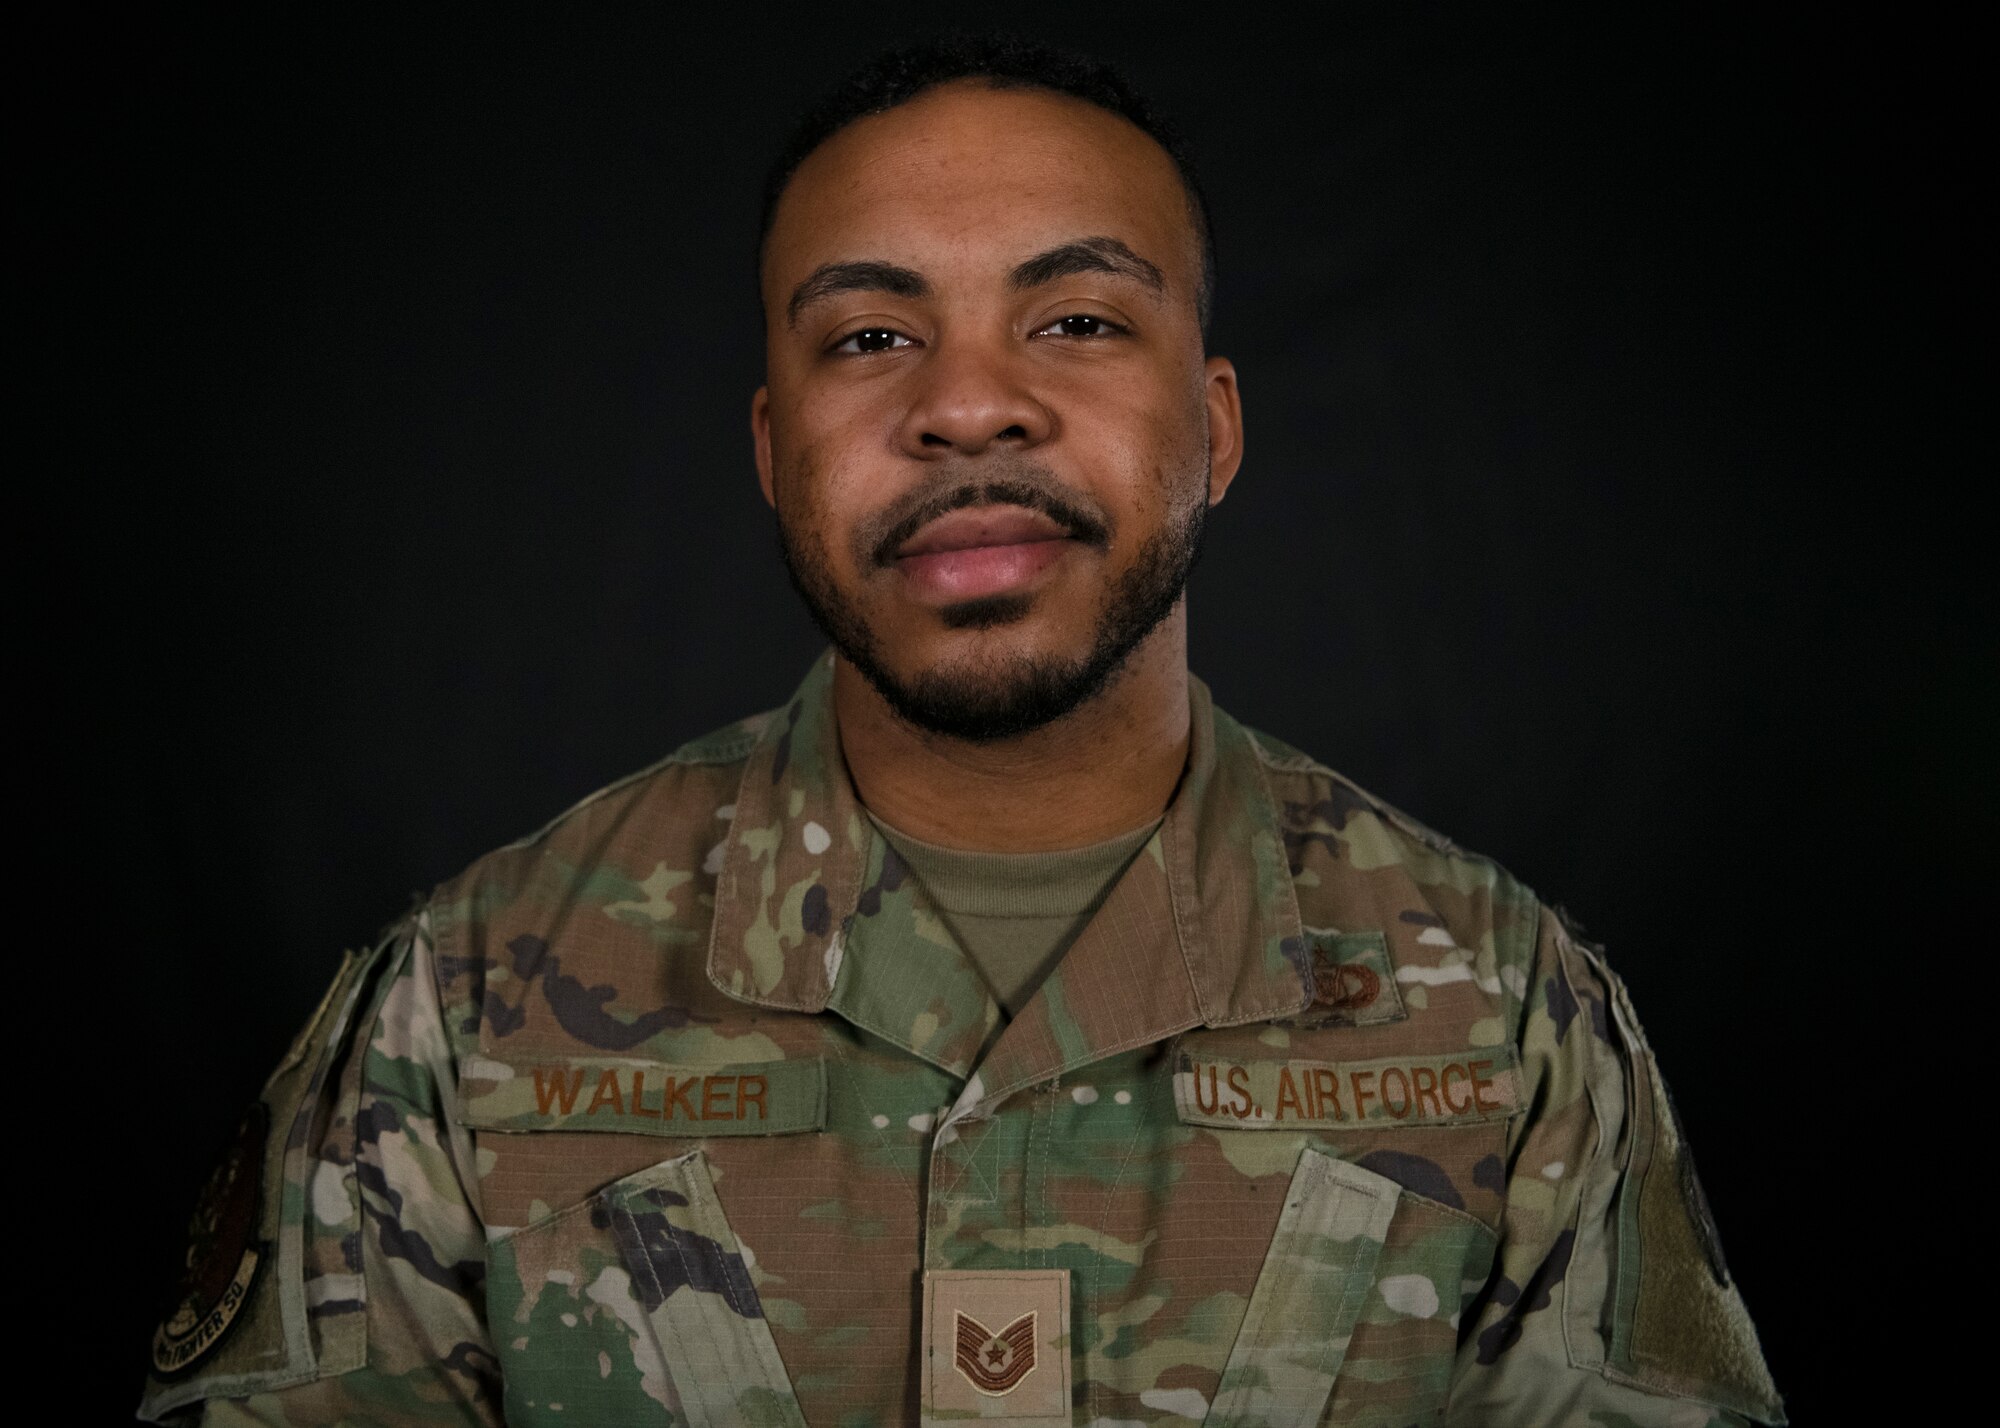 Tech. Sgt. Michael Walker, 309th Fighter Squadron aviation resource manager, helped save the lives of 28 people during an active shooter incident May 20, 2020, in the Westgate Entertainment District, Glendale, Arizona. For his actions, Walker was awarded the 2021 Air Force Sergeants Association William H. Pitsenbarger Heroism Award. AFSA presents the award annually to an enlisted Air Force member who has performed a heroic act, on or off duty. (U.S. Air Force photo by Senior Airman Caitlin Diaz-Gorsi)